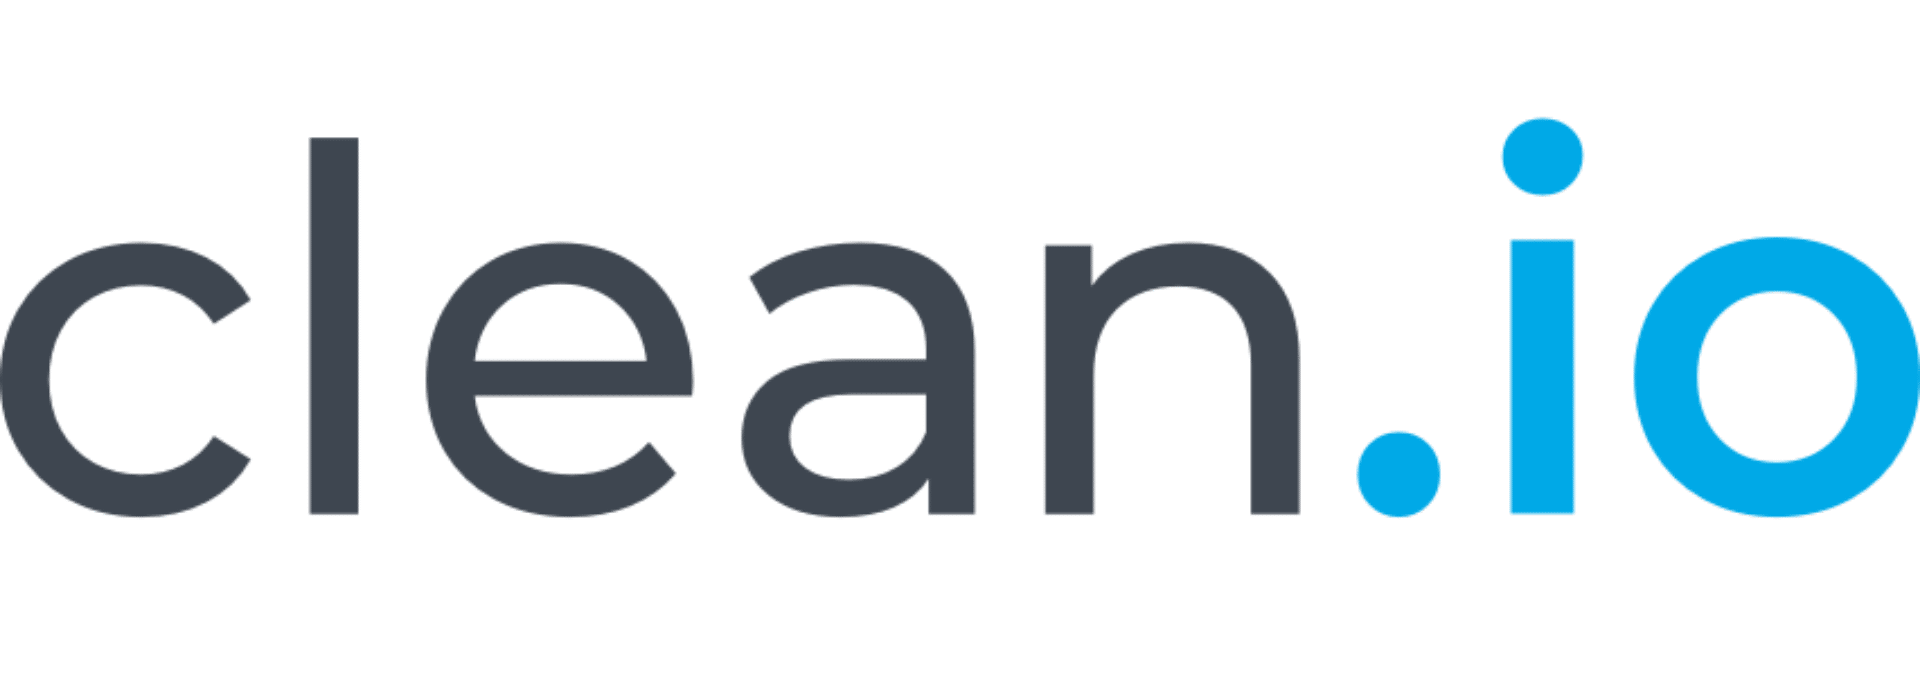 Featured Image for clean.io